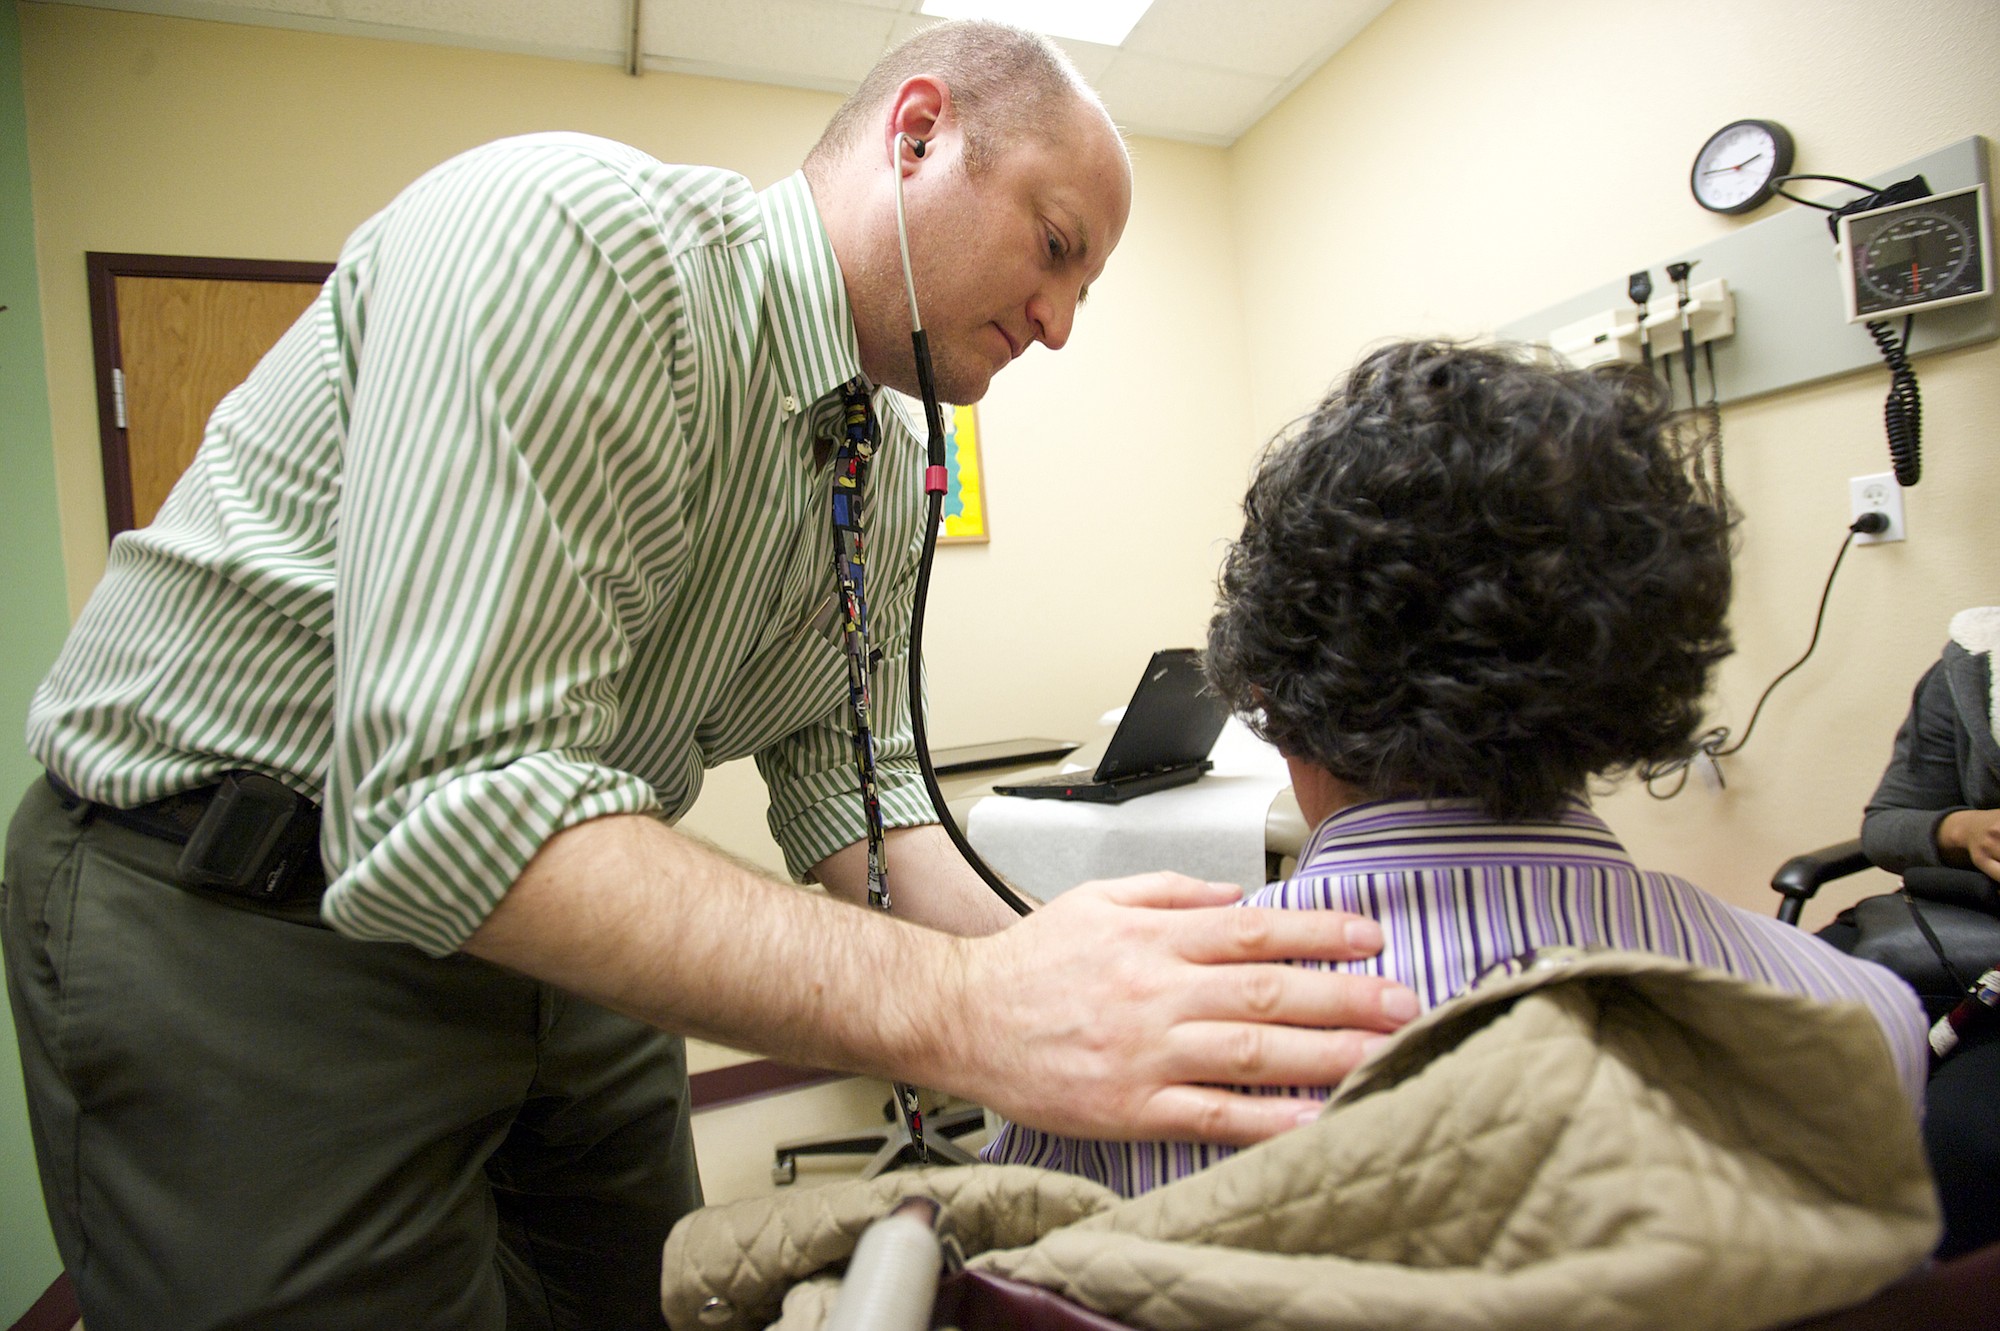 Dr. Tony Stupski cares for a patient Tuesday at Sea Mar Community Health Centers' Vancouver medical clinic.